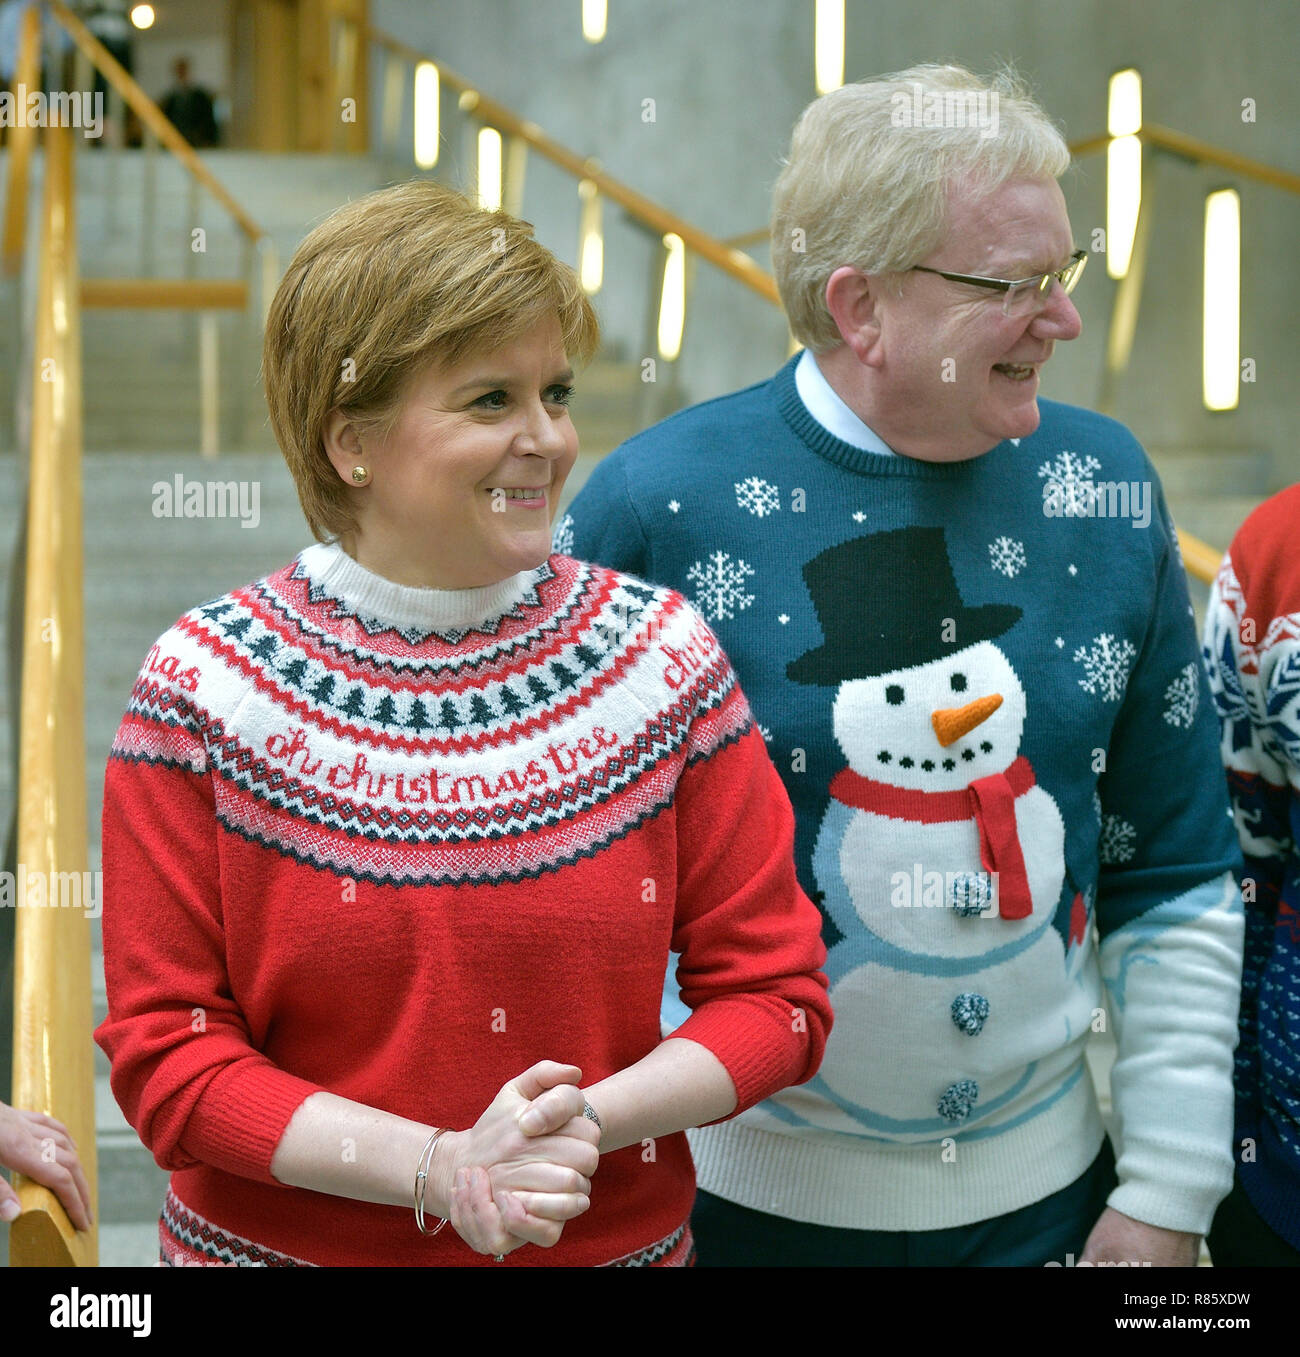 Save the Children's Christmas Jumper Day 2018. PICTURED L-R  at the Scottish Parliament with their Christmas jumpers on are First Minister Nicola Sturgeon (SNP) and Jackson Carlaw  Scottish Conservative Deputy Leader. Stock Photo